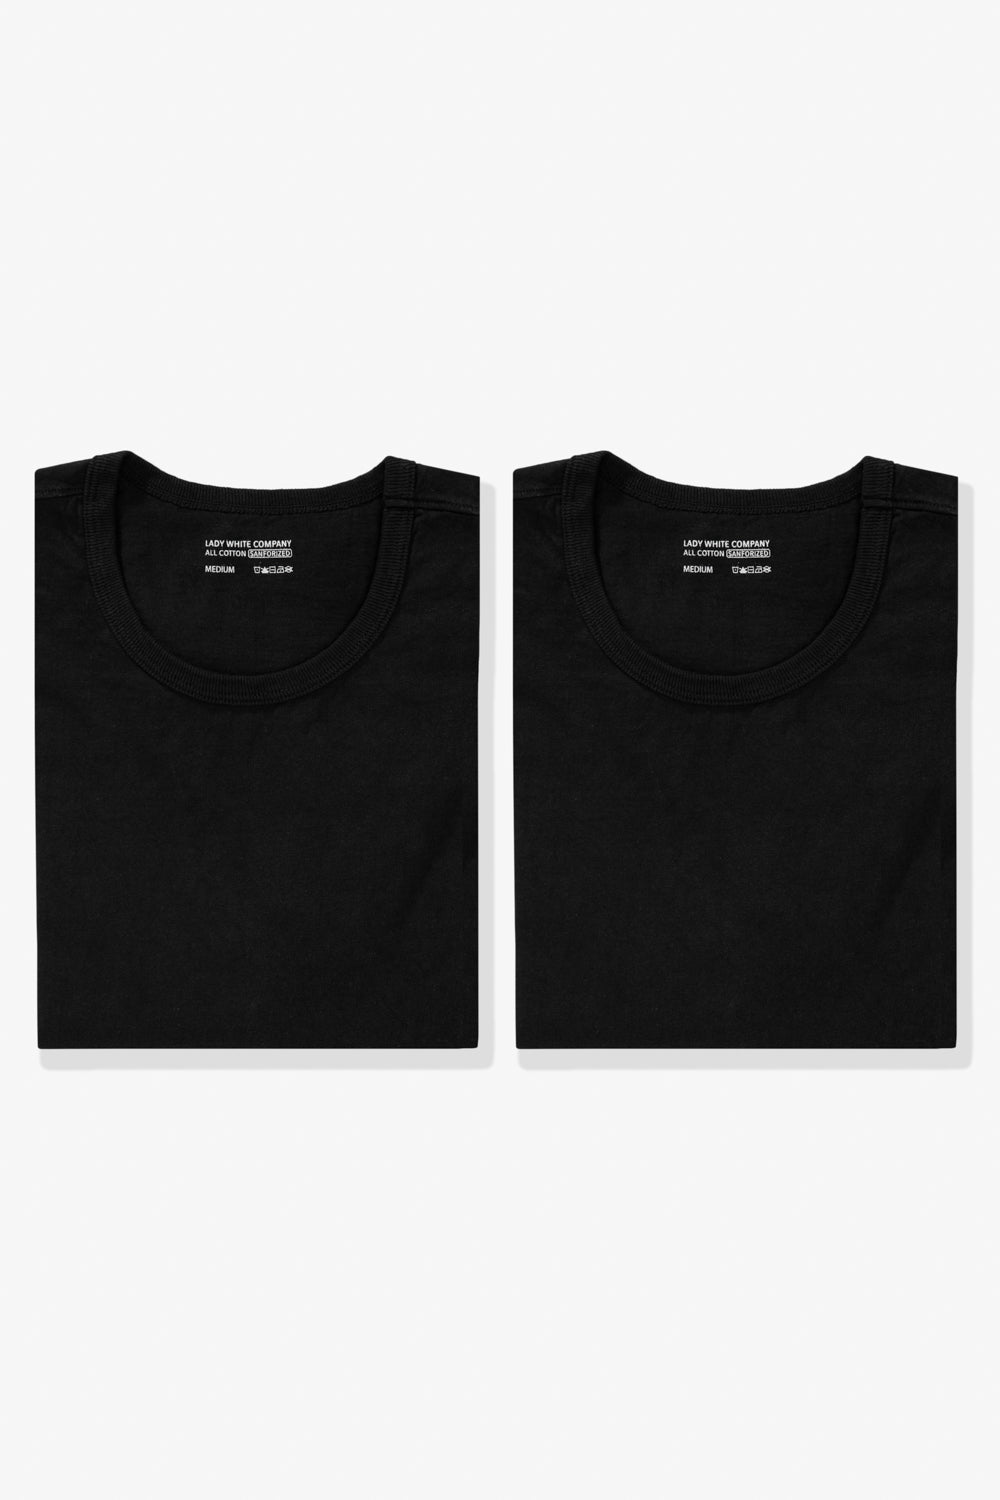 OUR T-SHIRT 2-PACK - BLACK – LADY WHITE